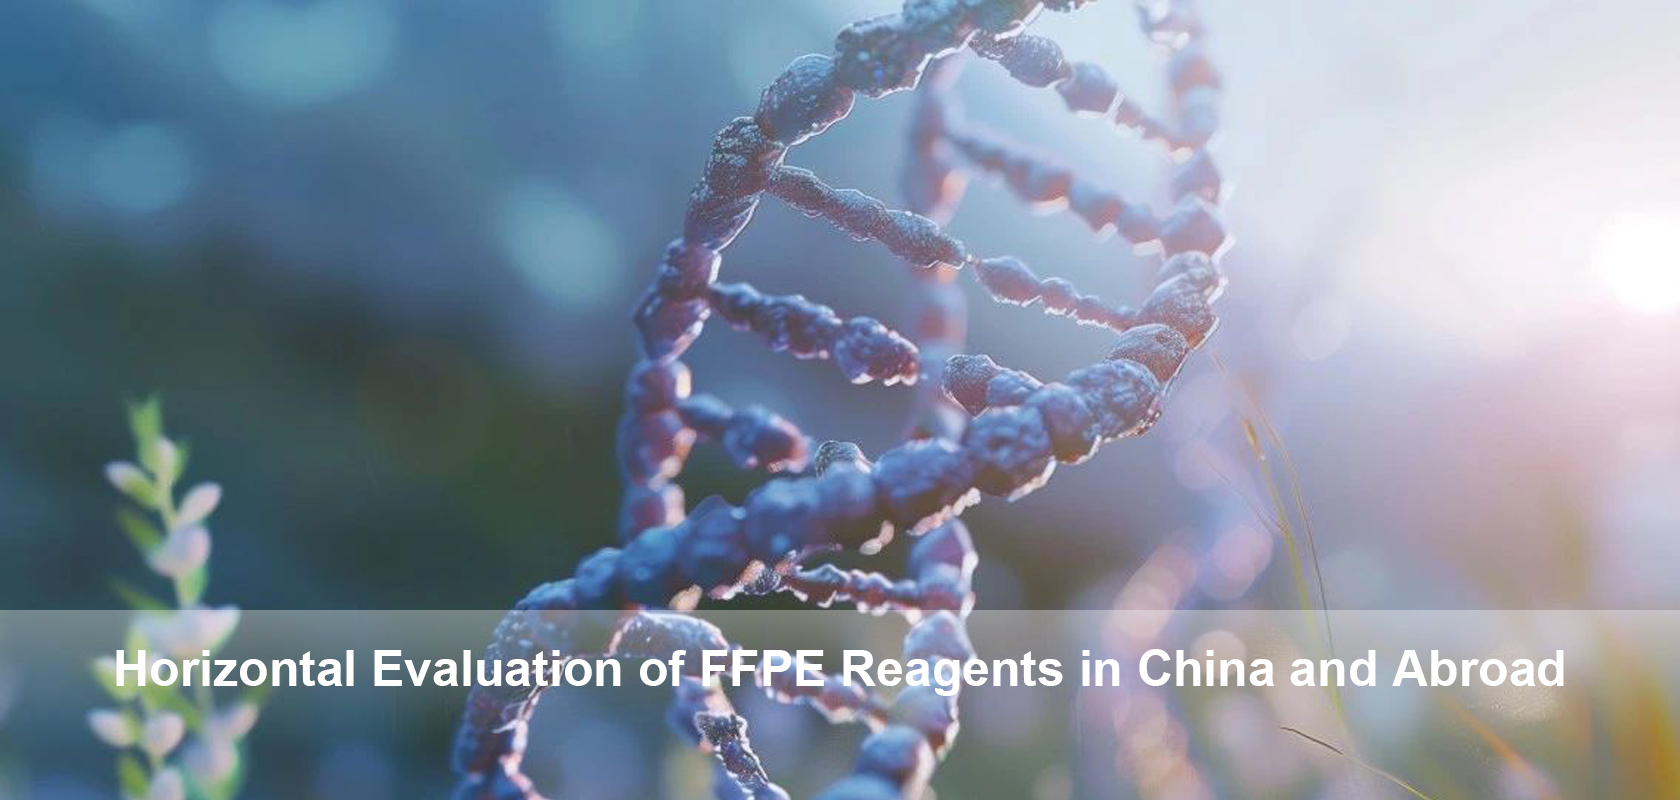 Horizontal Evaluation of FFPE Reagents in China and Abroad